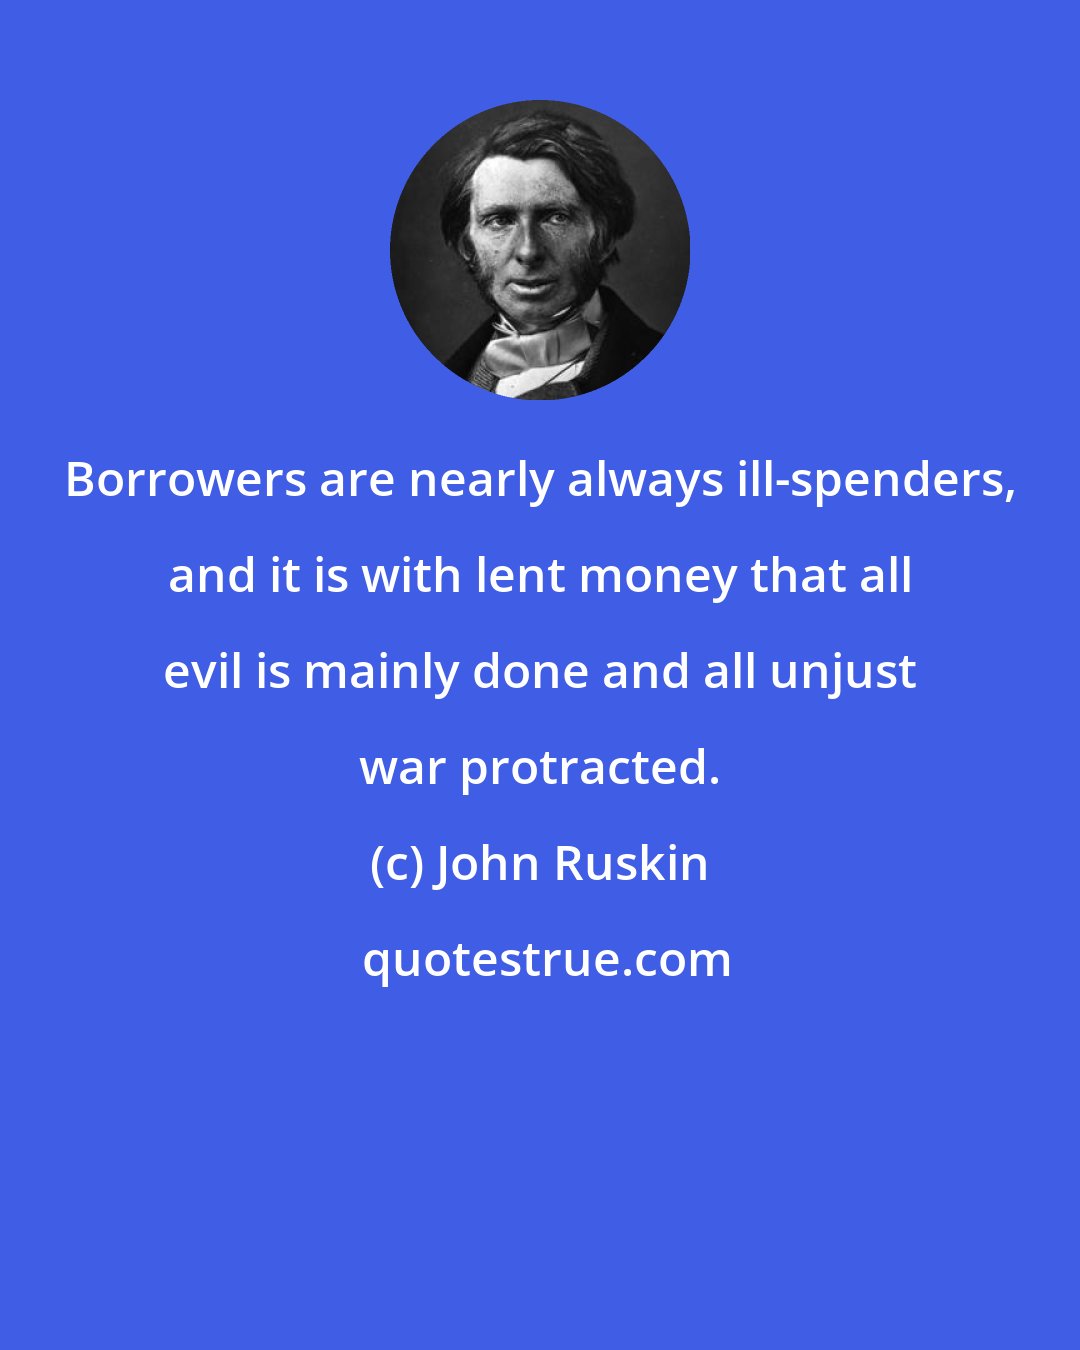 John Ruskin: Borrowers are nearly always ill-spenders, and it is with lent money that all evil is mainly done and all unjust war protracted.